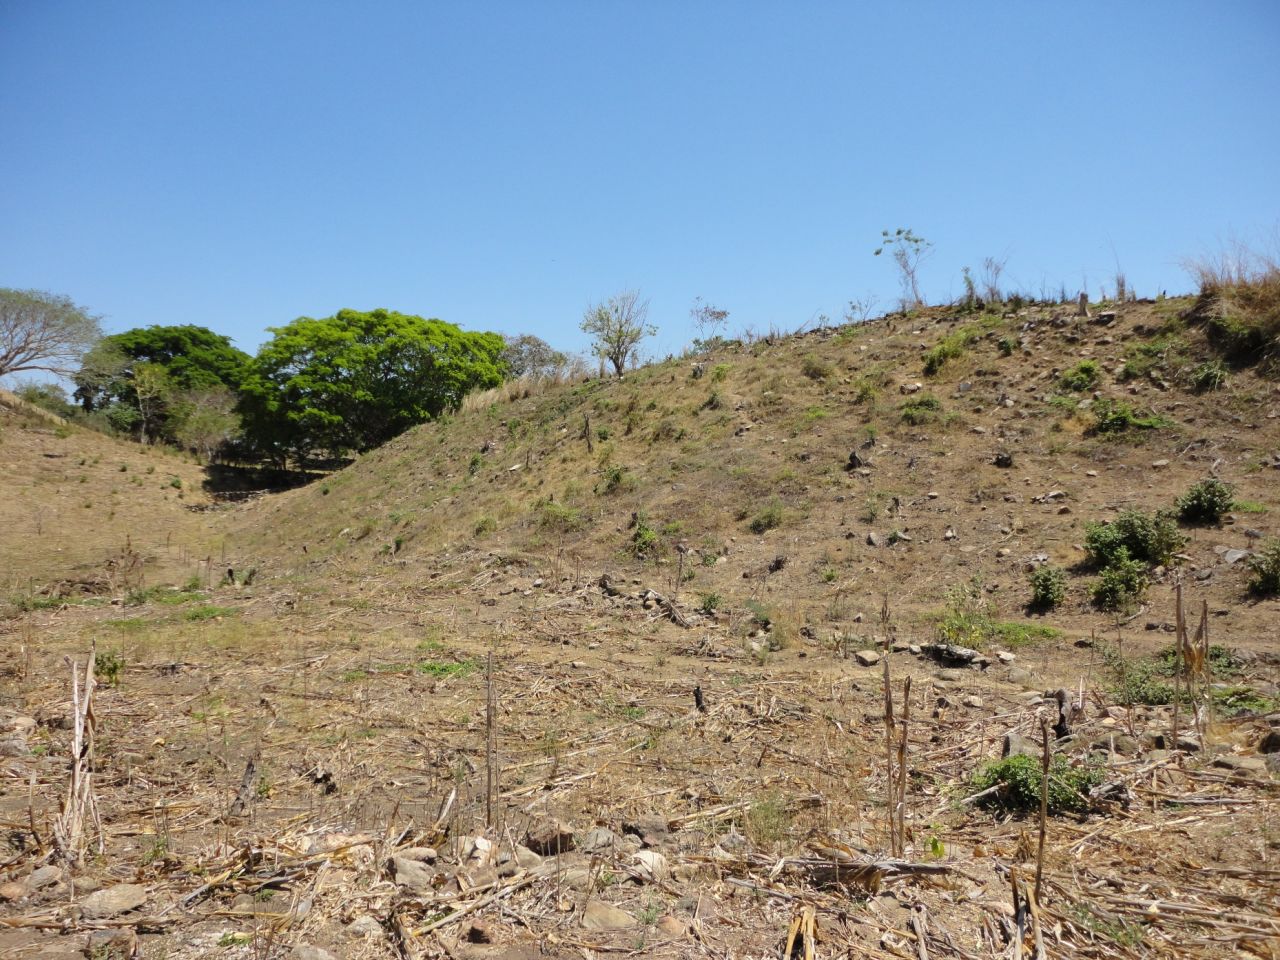 The pre-Hispanic site of Piedra Labrada had five ball fields and just began to be explored in 2011.  